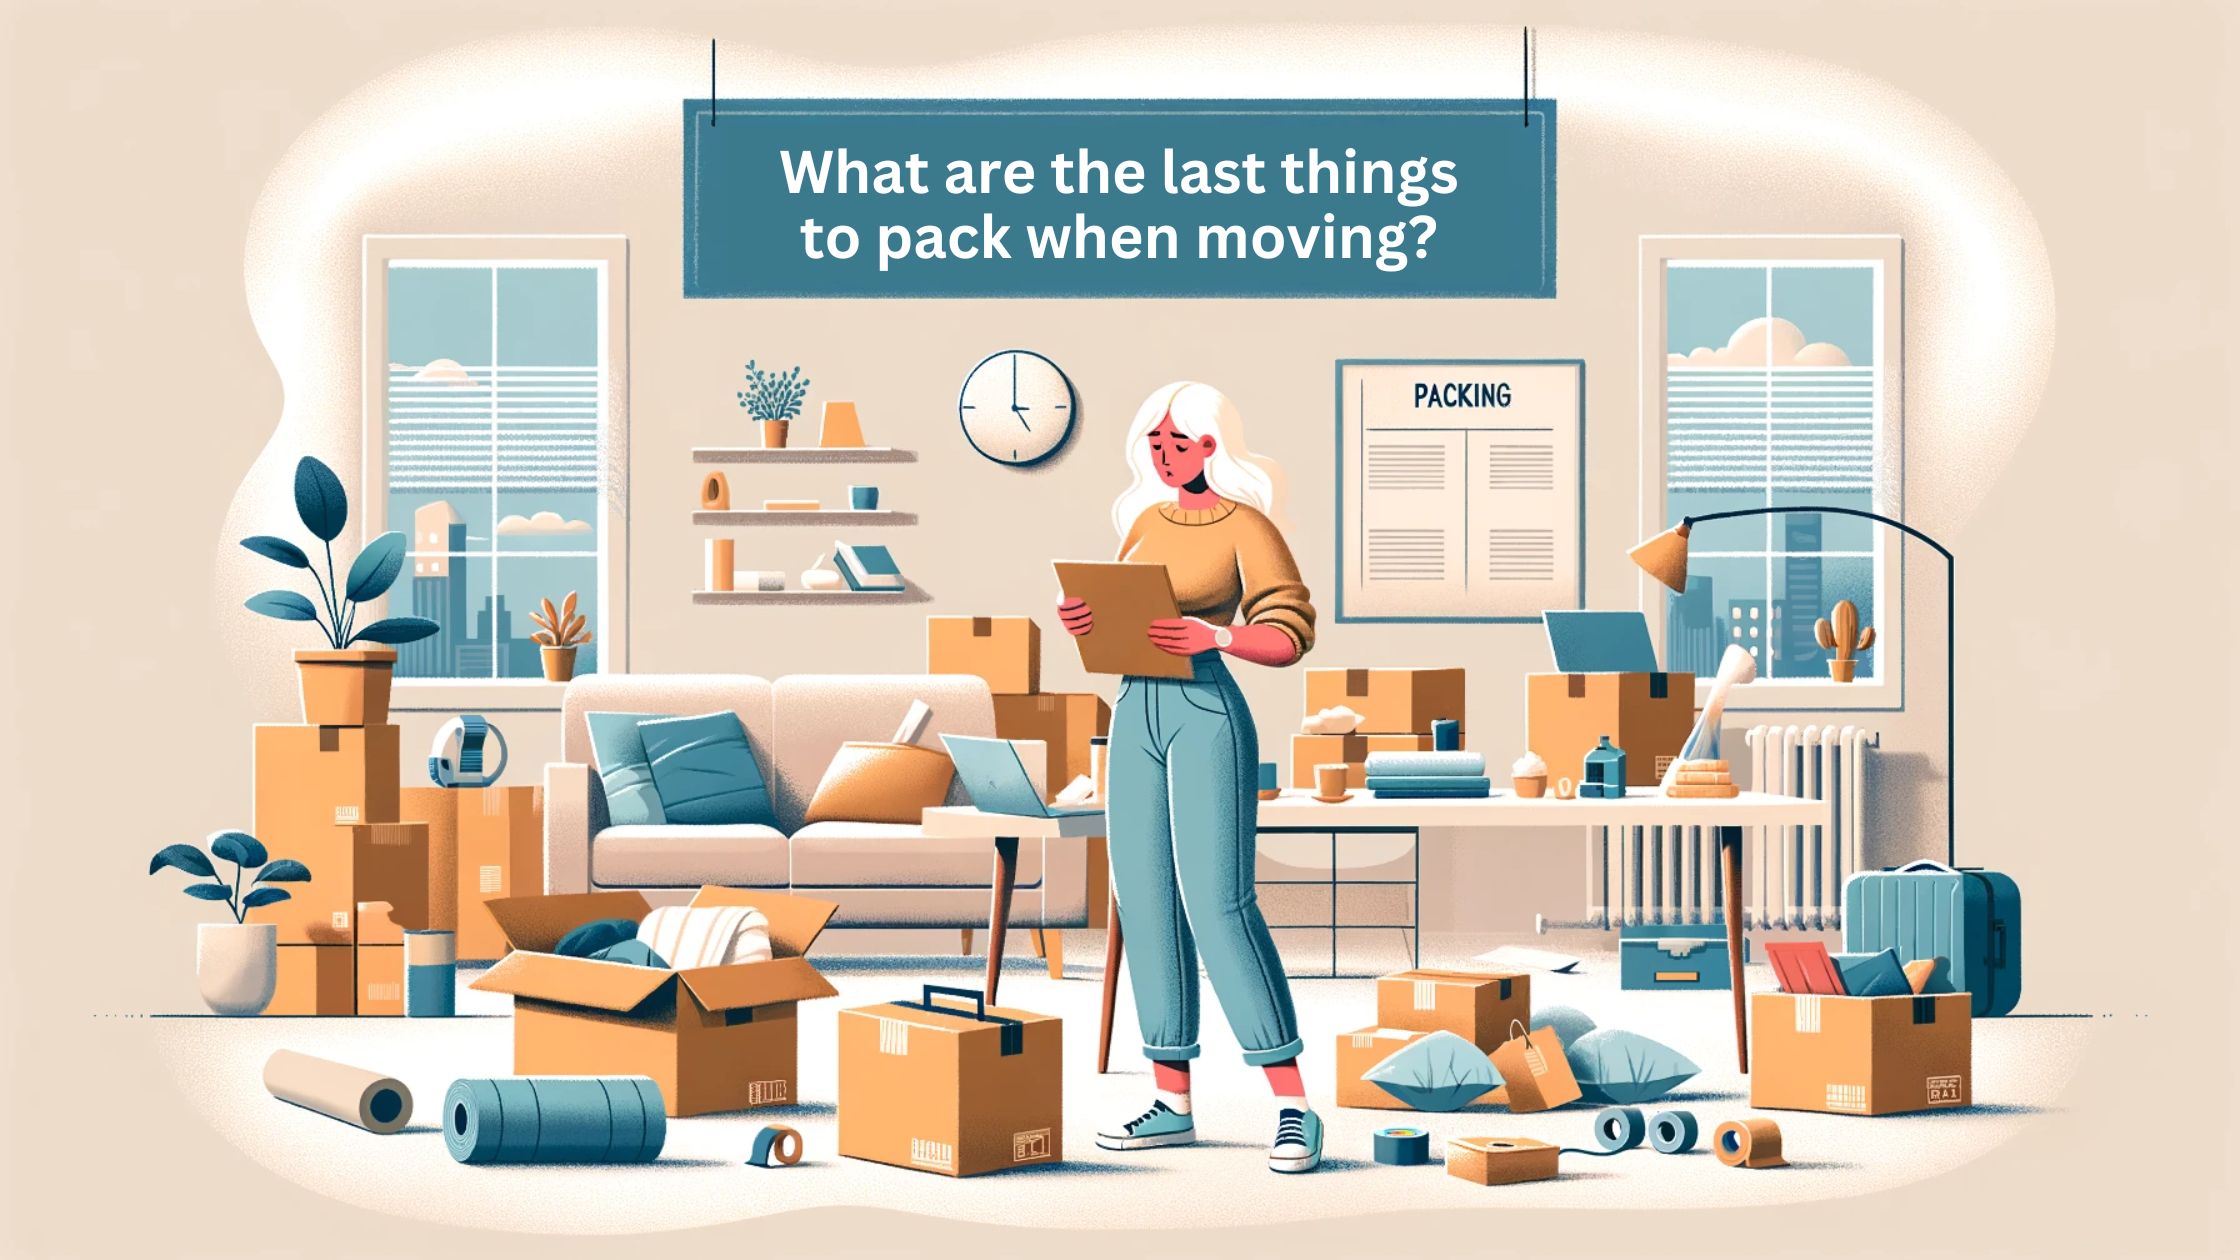 What are the last things to pack when moving?